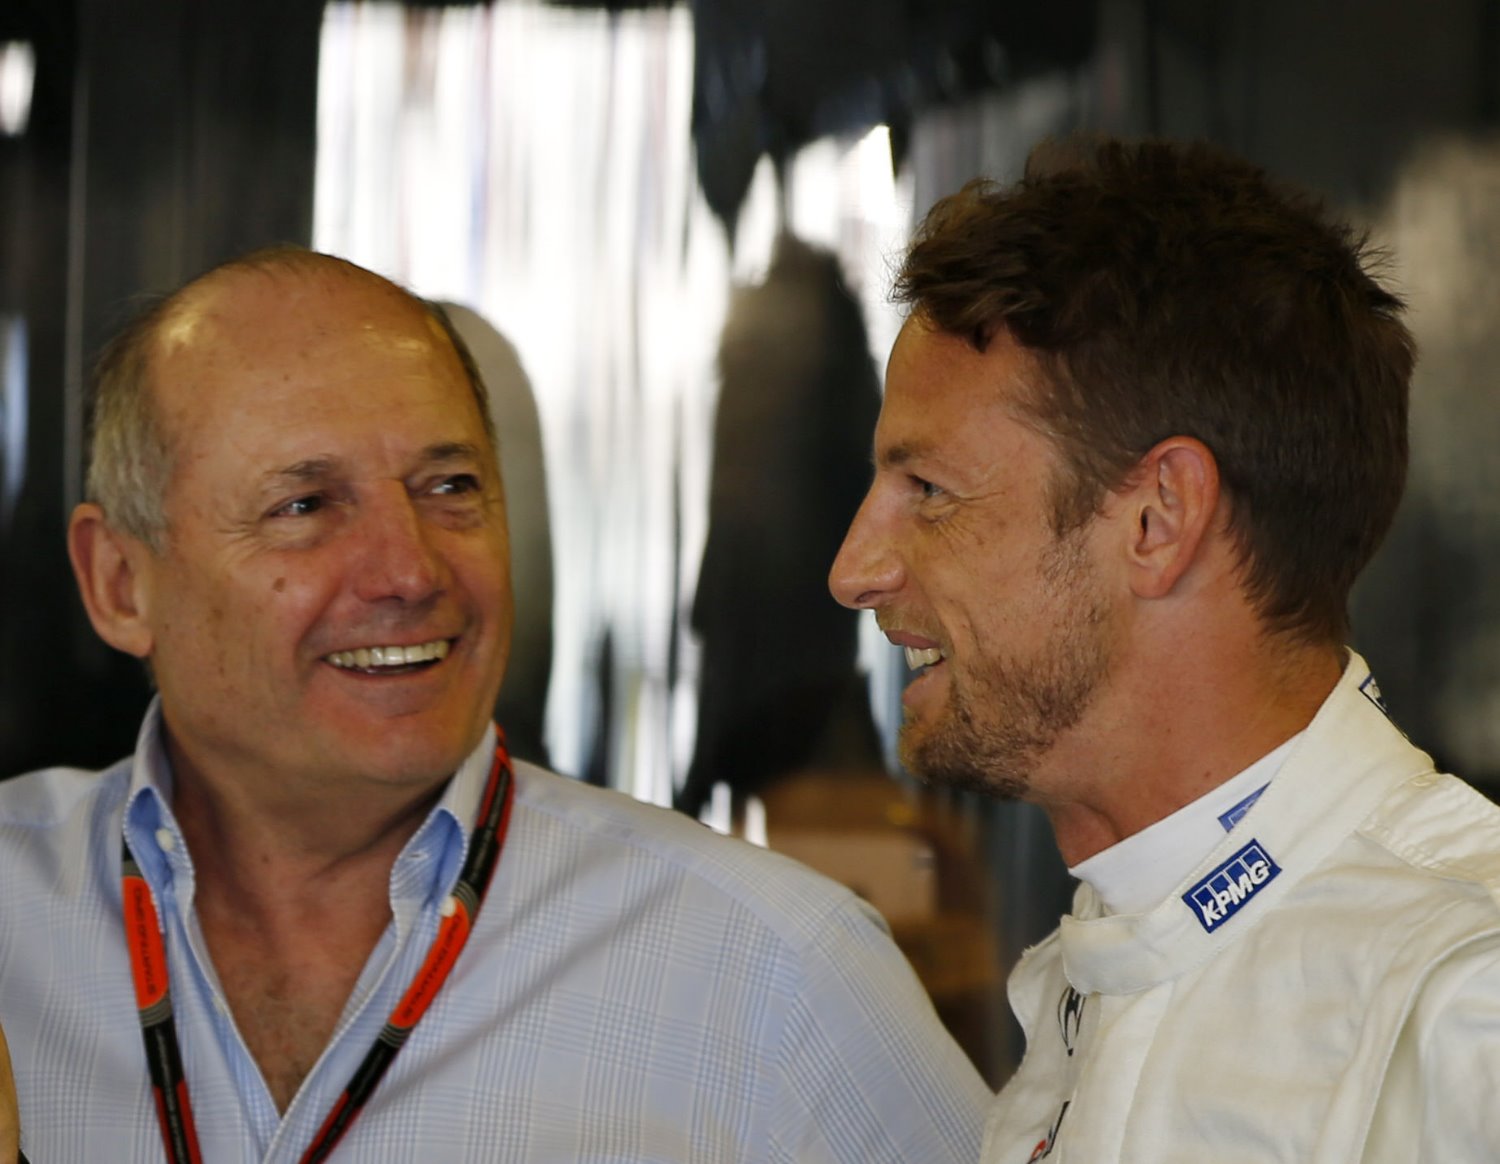 Will Dennis and Button be smiling in 2016?